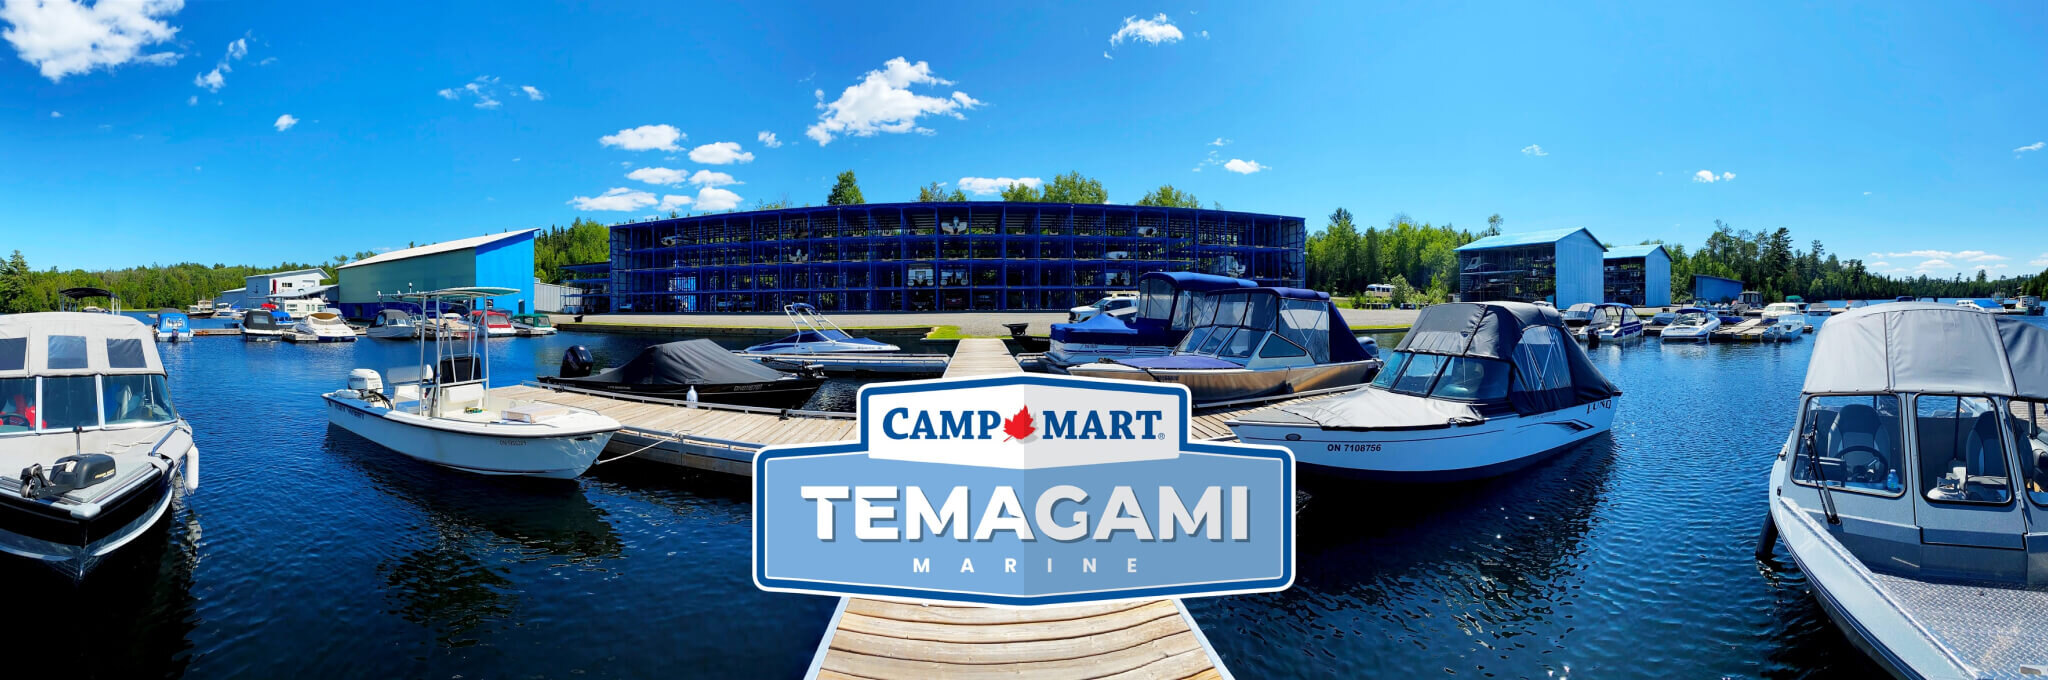 Temagami Marine Map & Hours